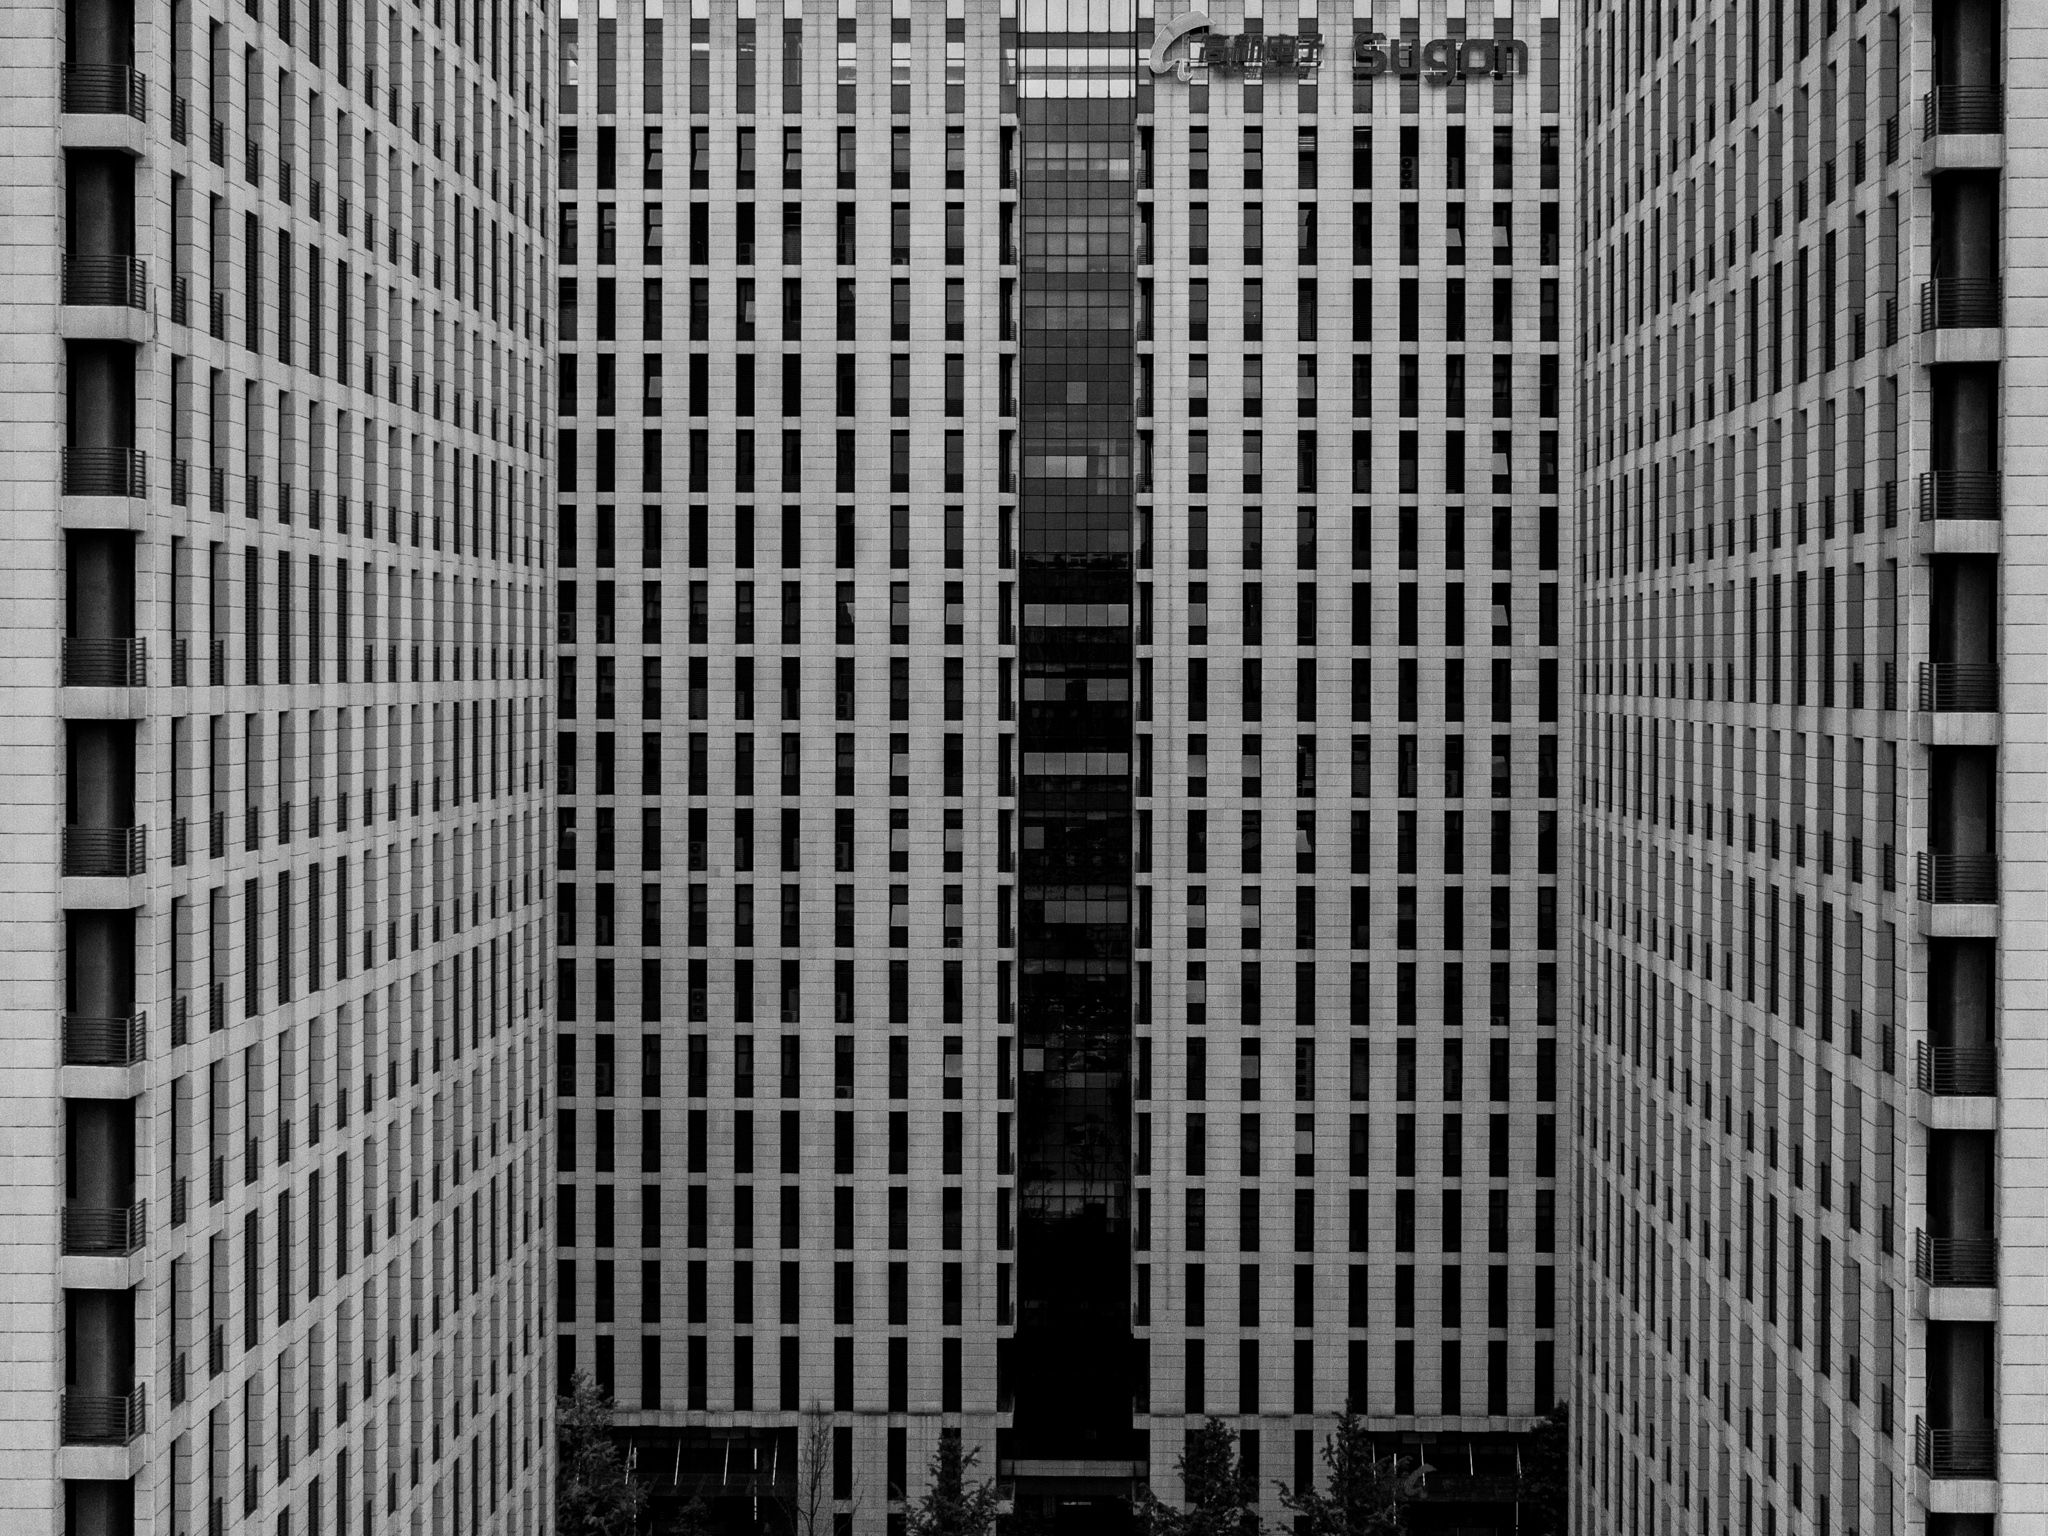 bird's eye view, aerial view, black and white, symmetry, repetition, tall buildings, cells, Druz Denys